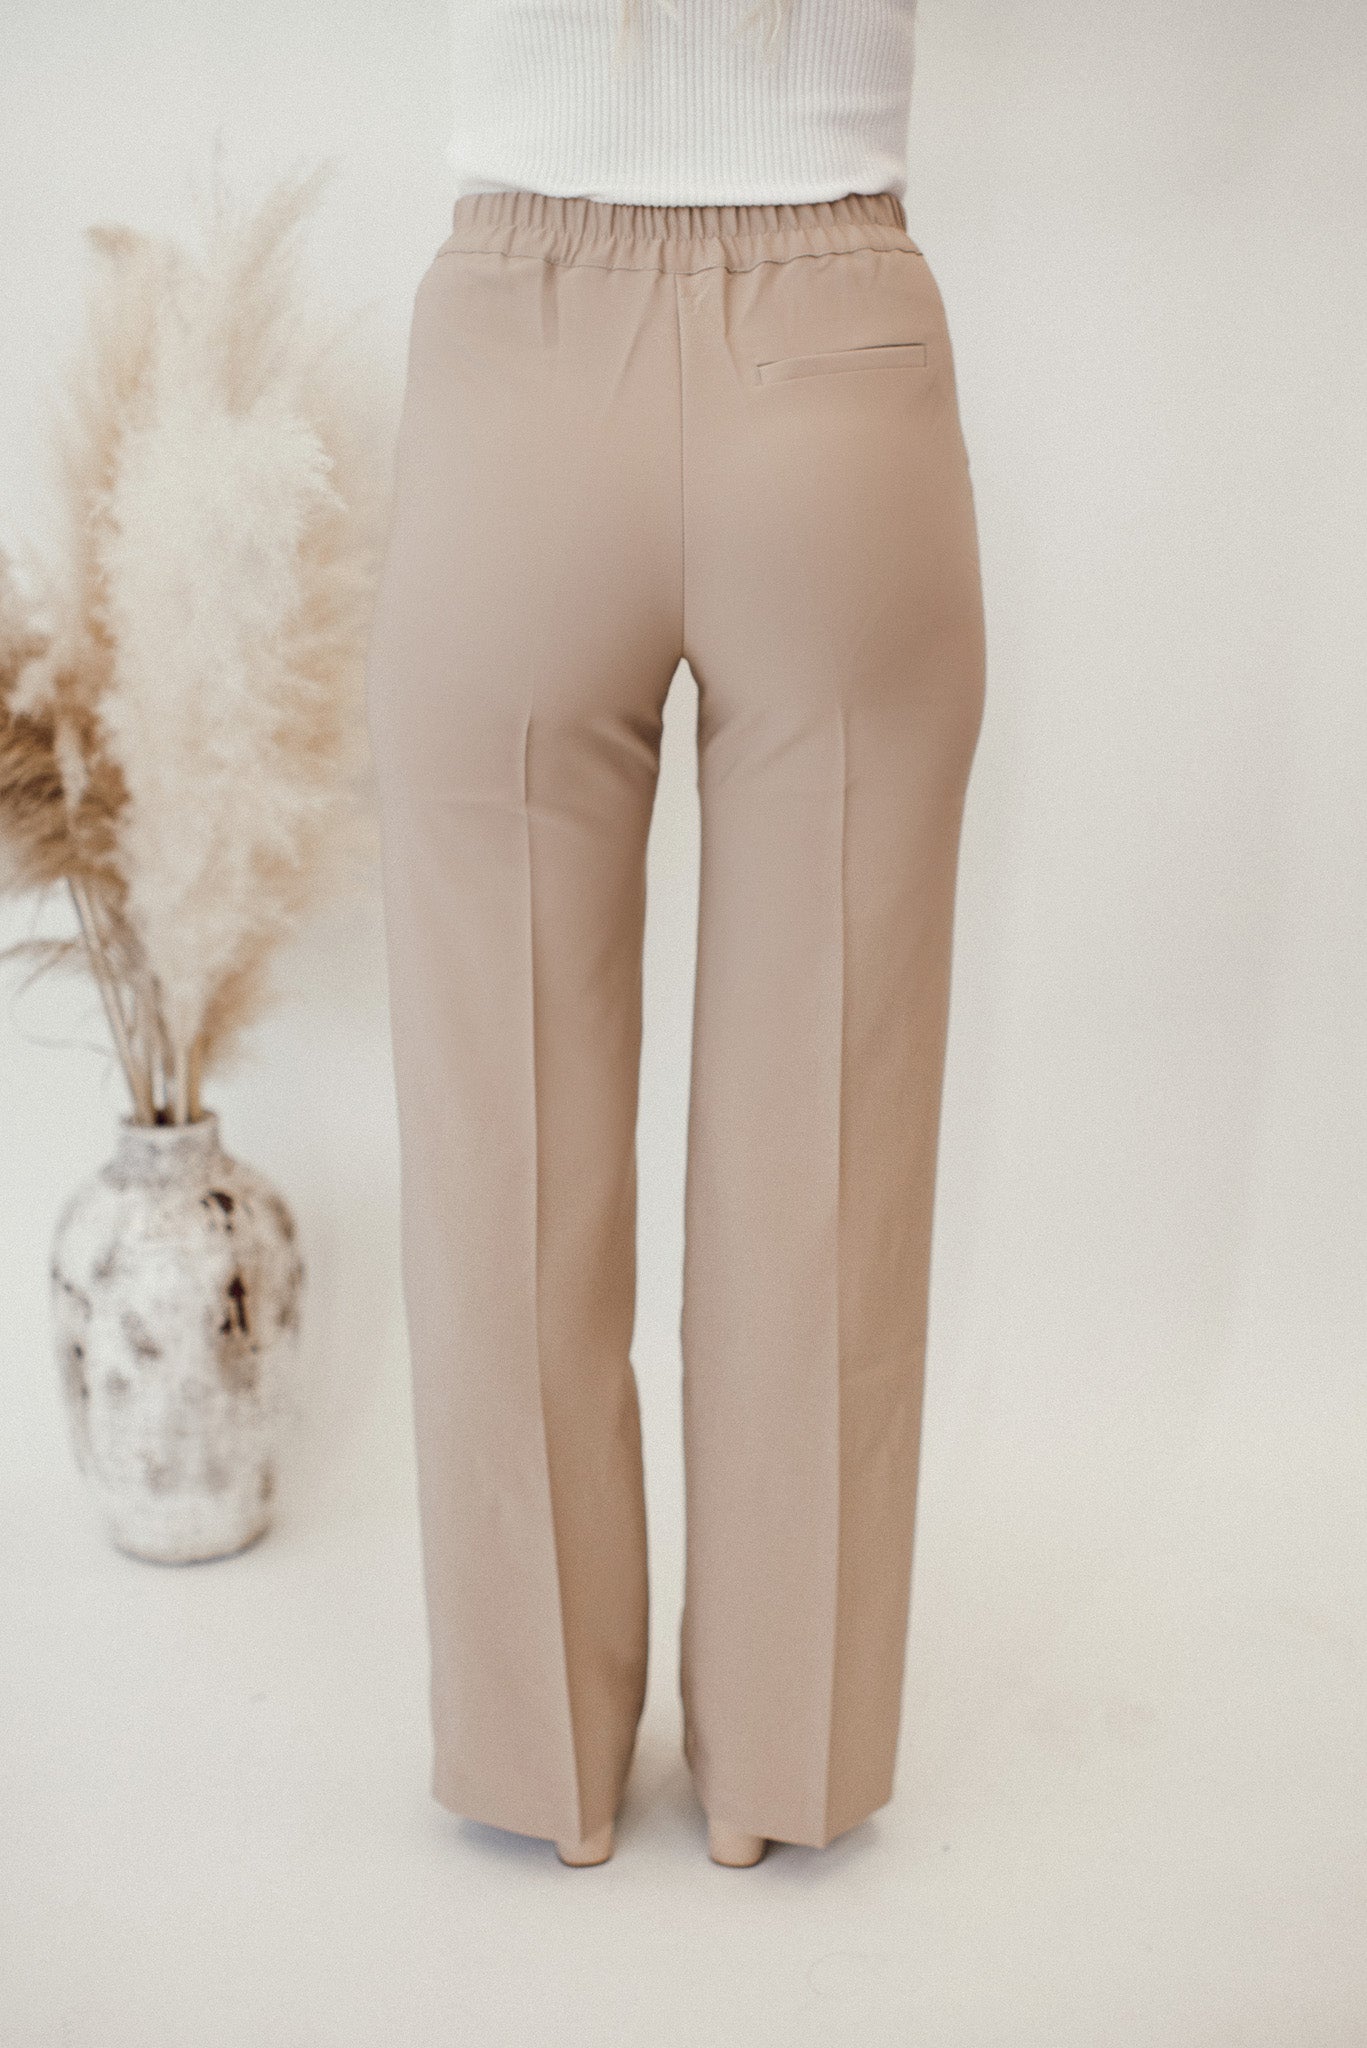 Of Course Pants (Camel)